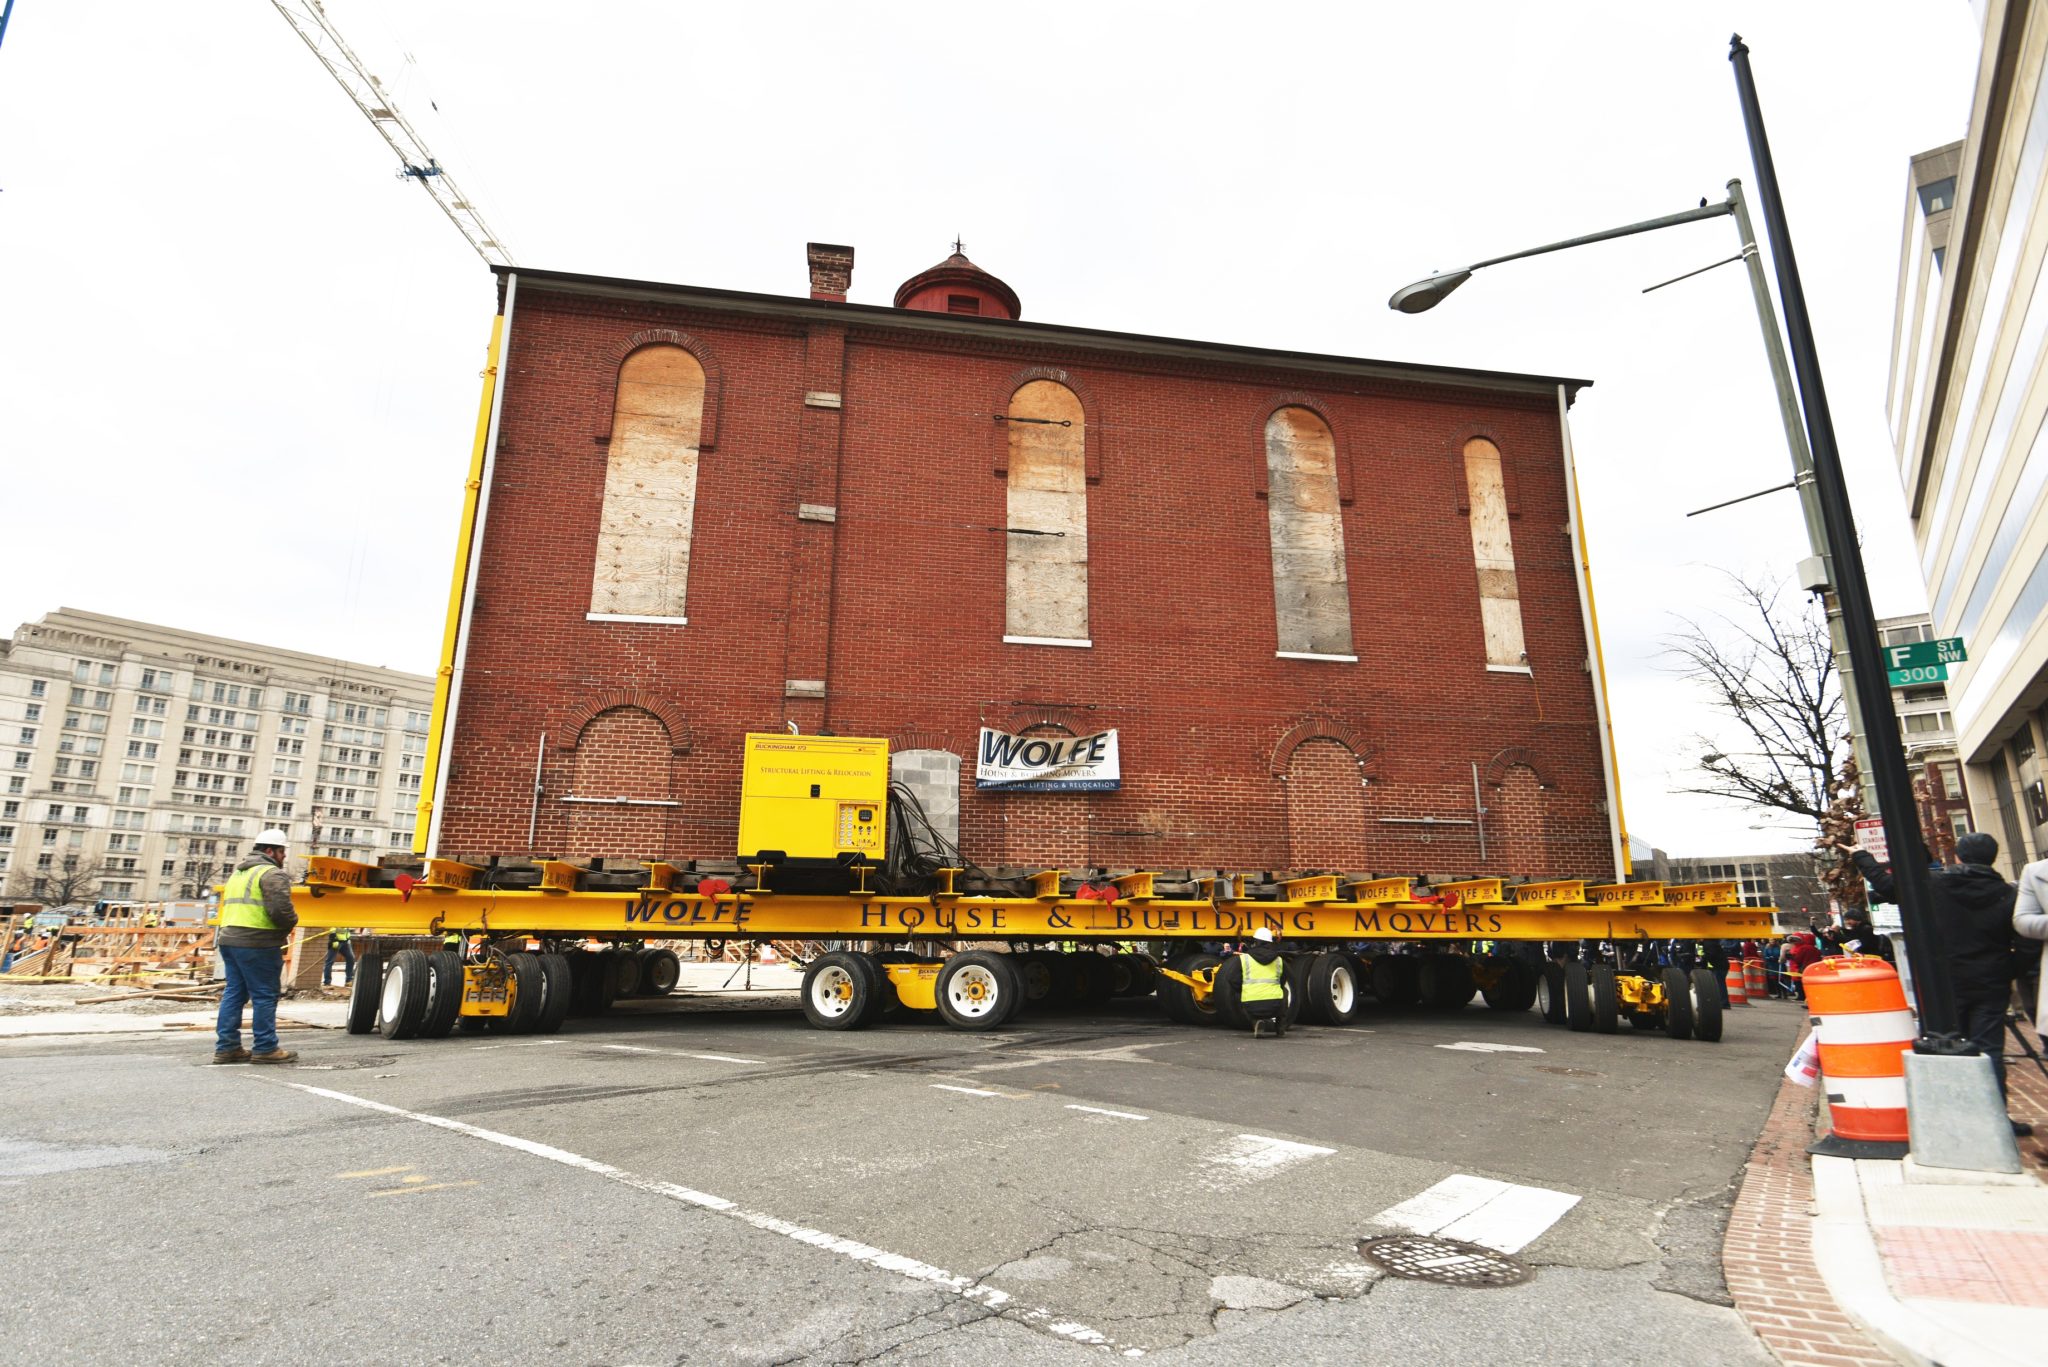 Side view of Jewish historic synagogue moving on turning dolly.